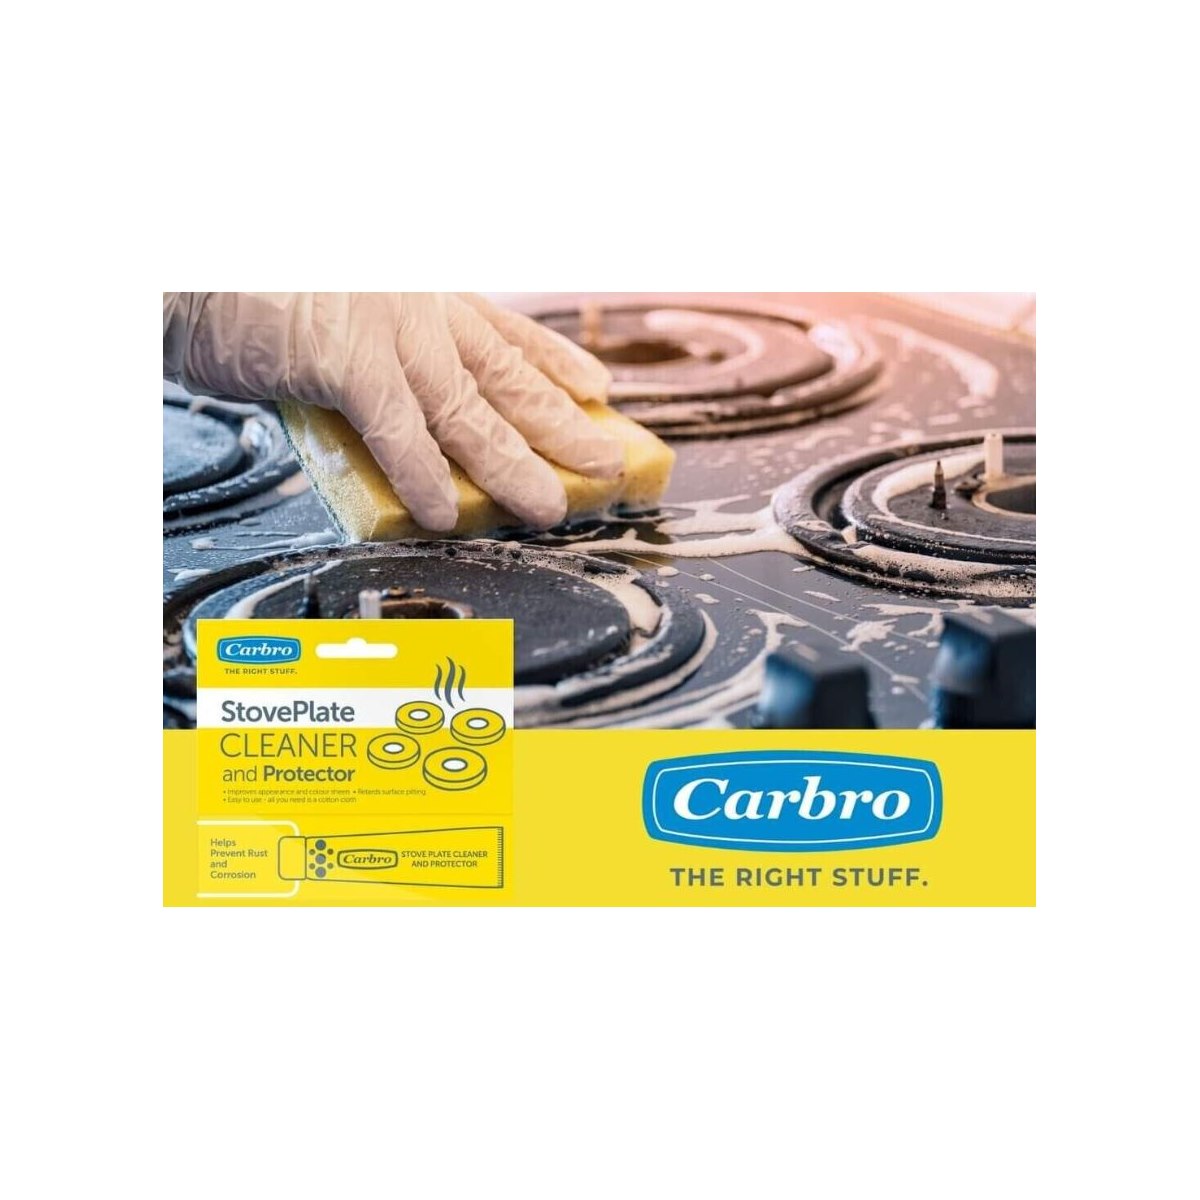 How to use Carbro Stove Plate Cleaner